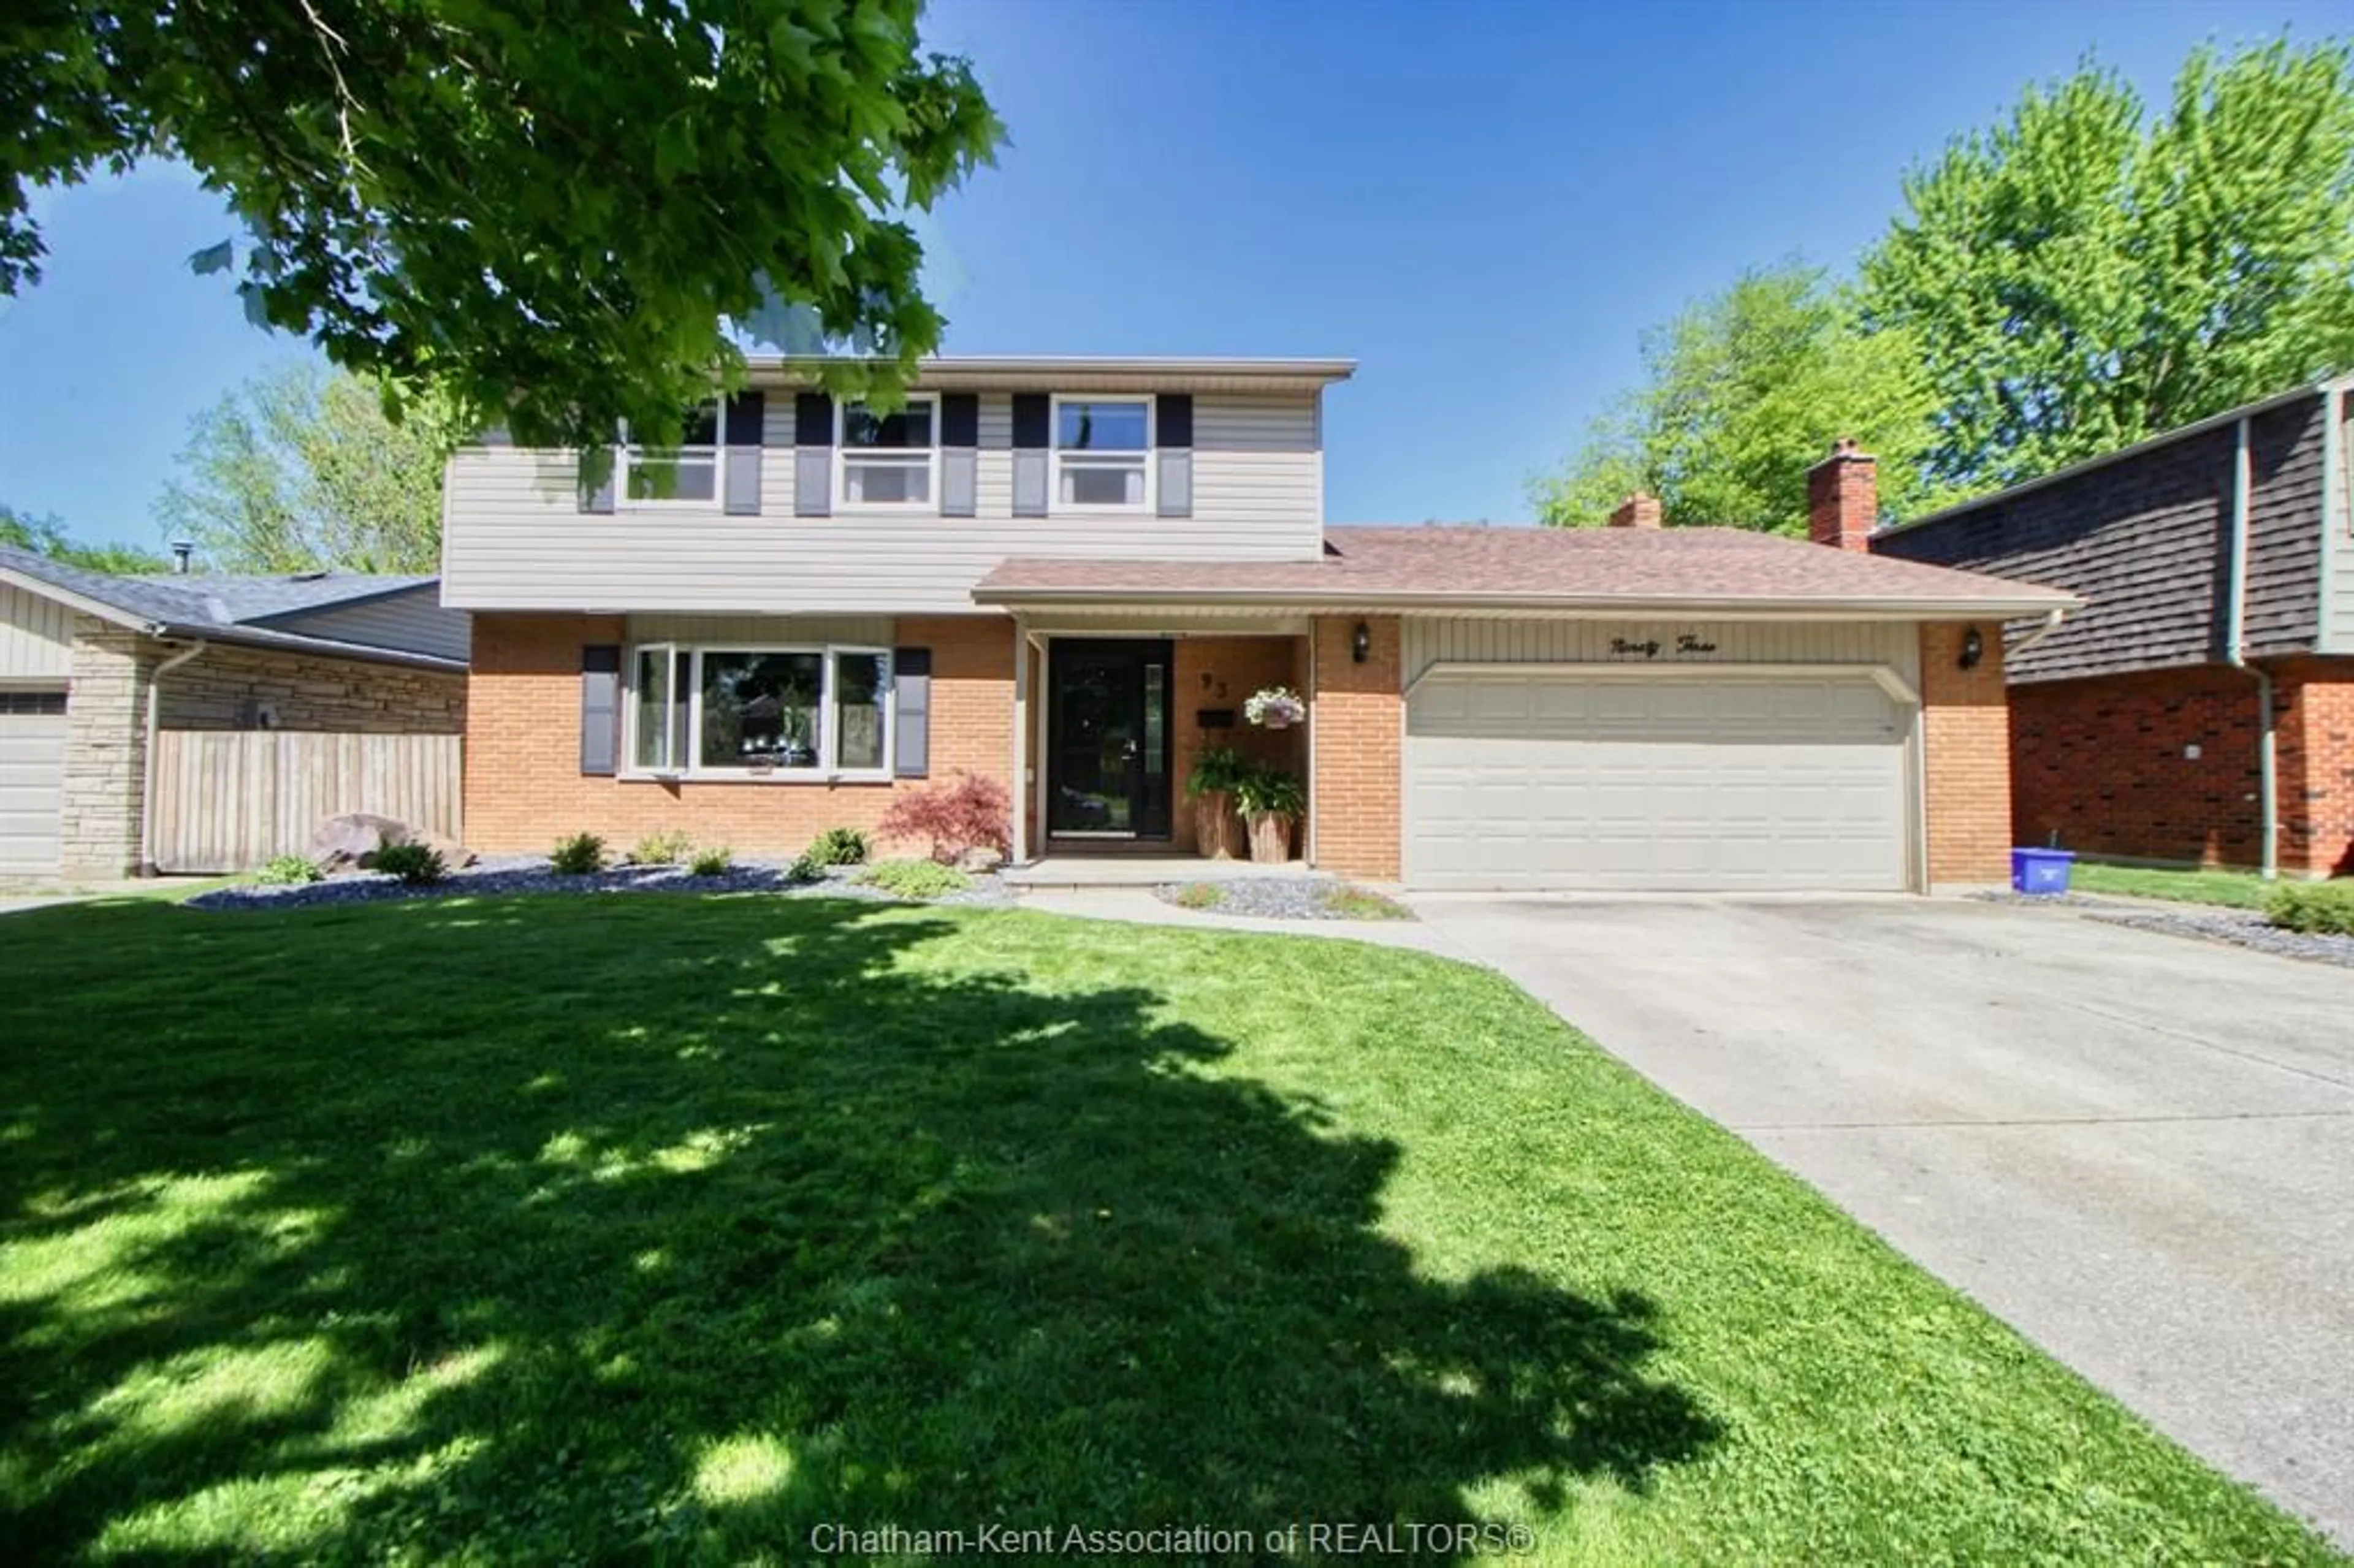 Home with brick exterior material for 93 Sylvester Dr, Chatham Ontario N7M 2B7